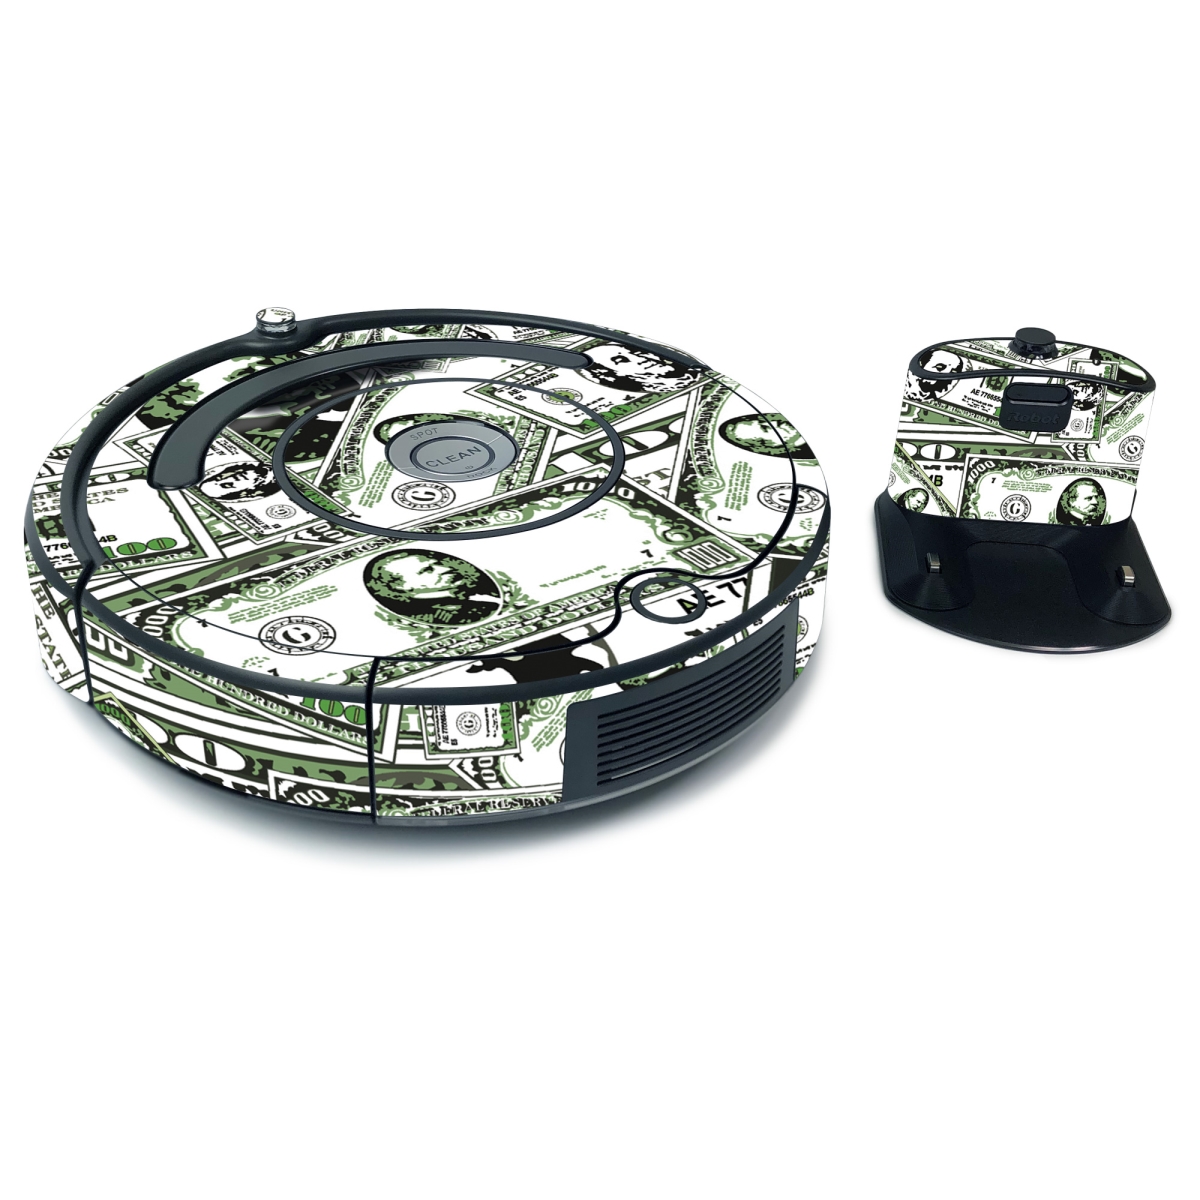 Picture of MightySkins IRRO675-Phat Cash Skin for Irobot Roomba 675 Max Coverage - Phat Cash